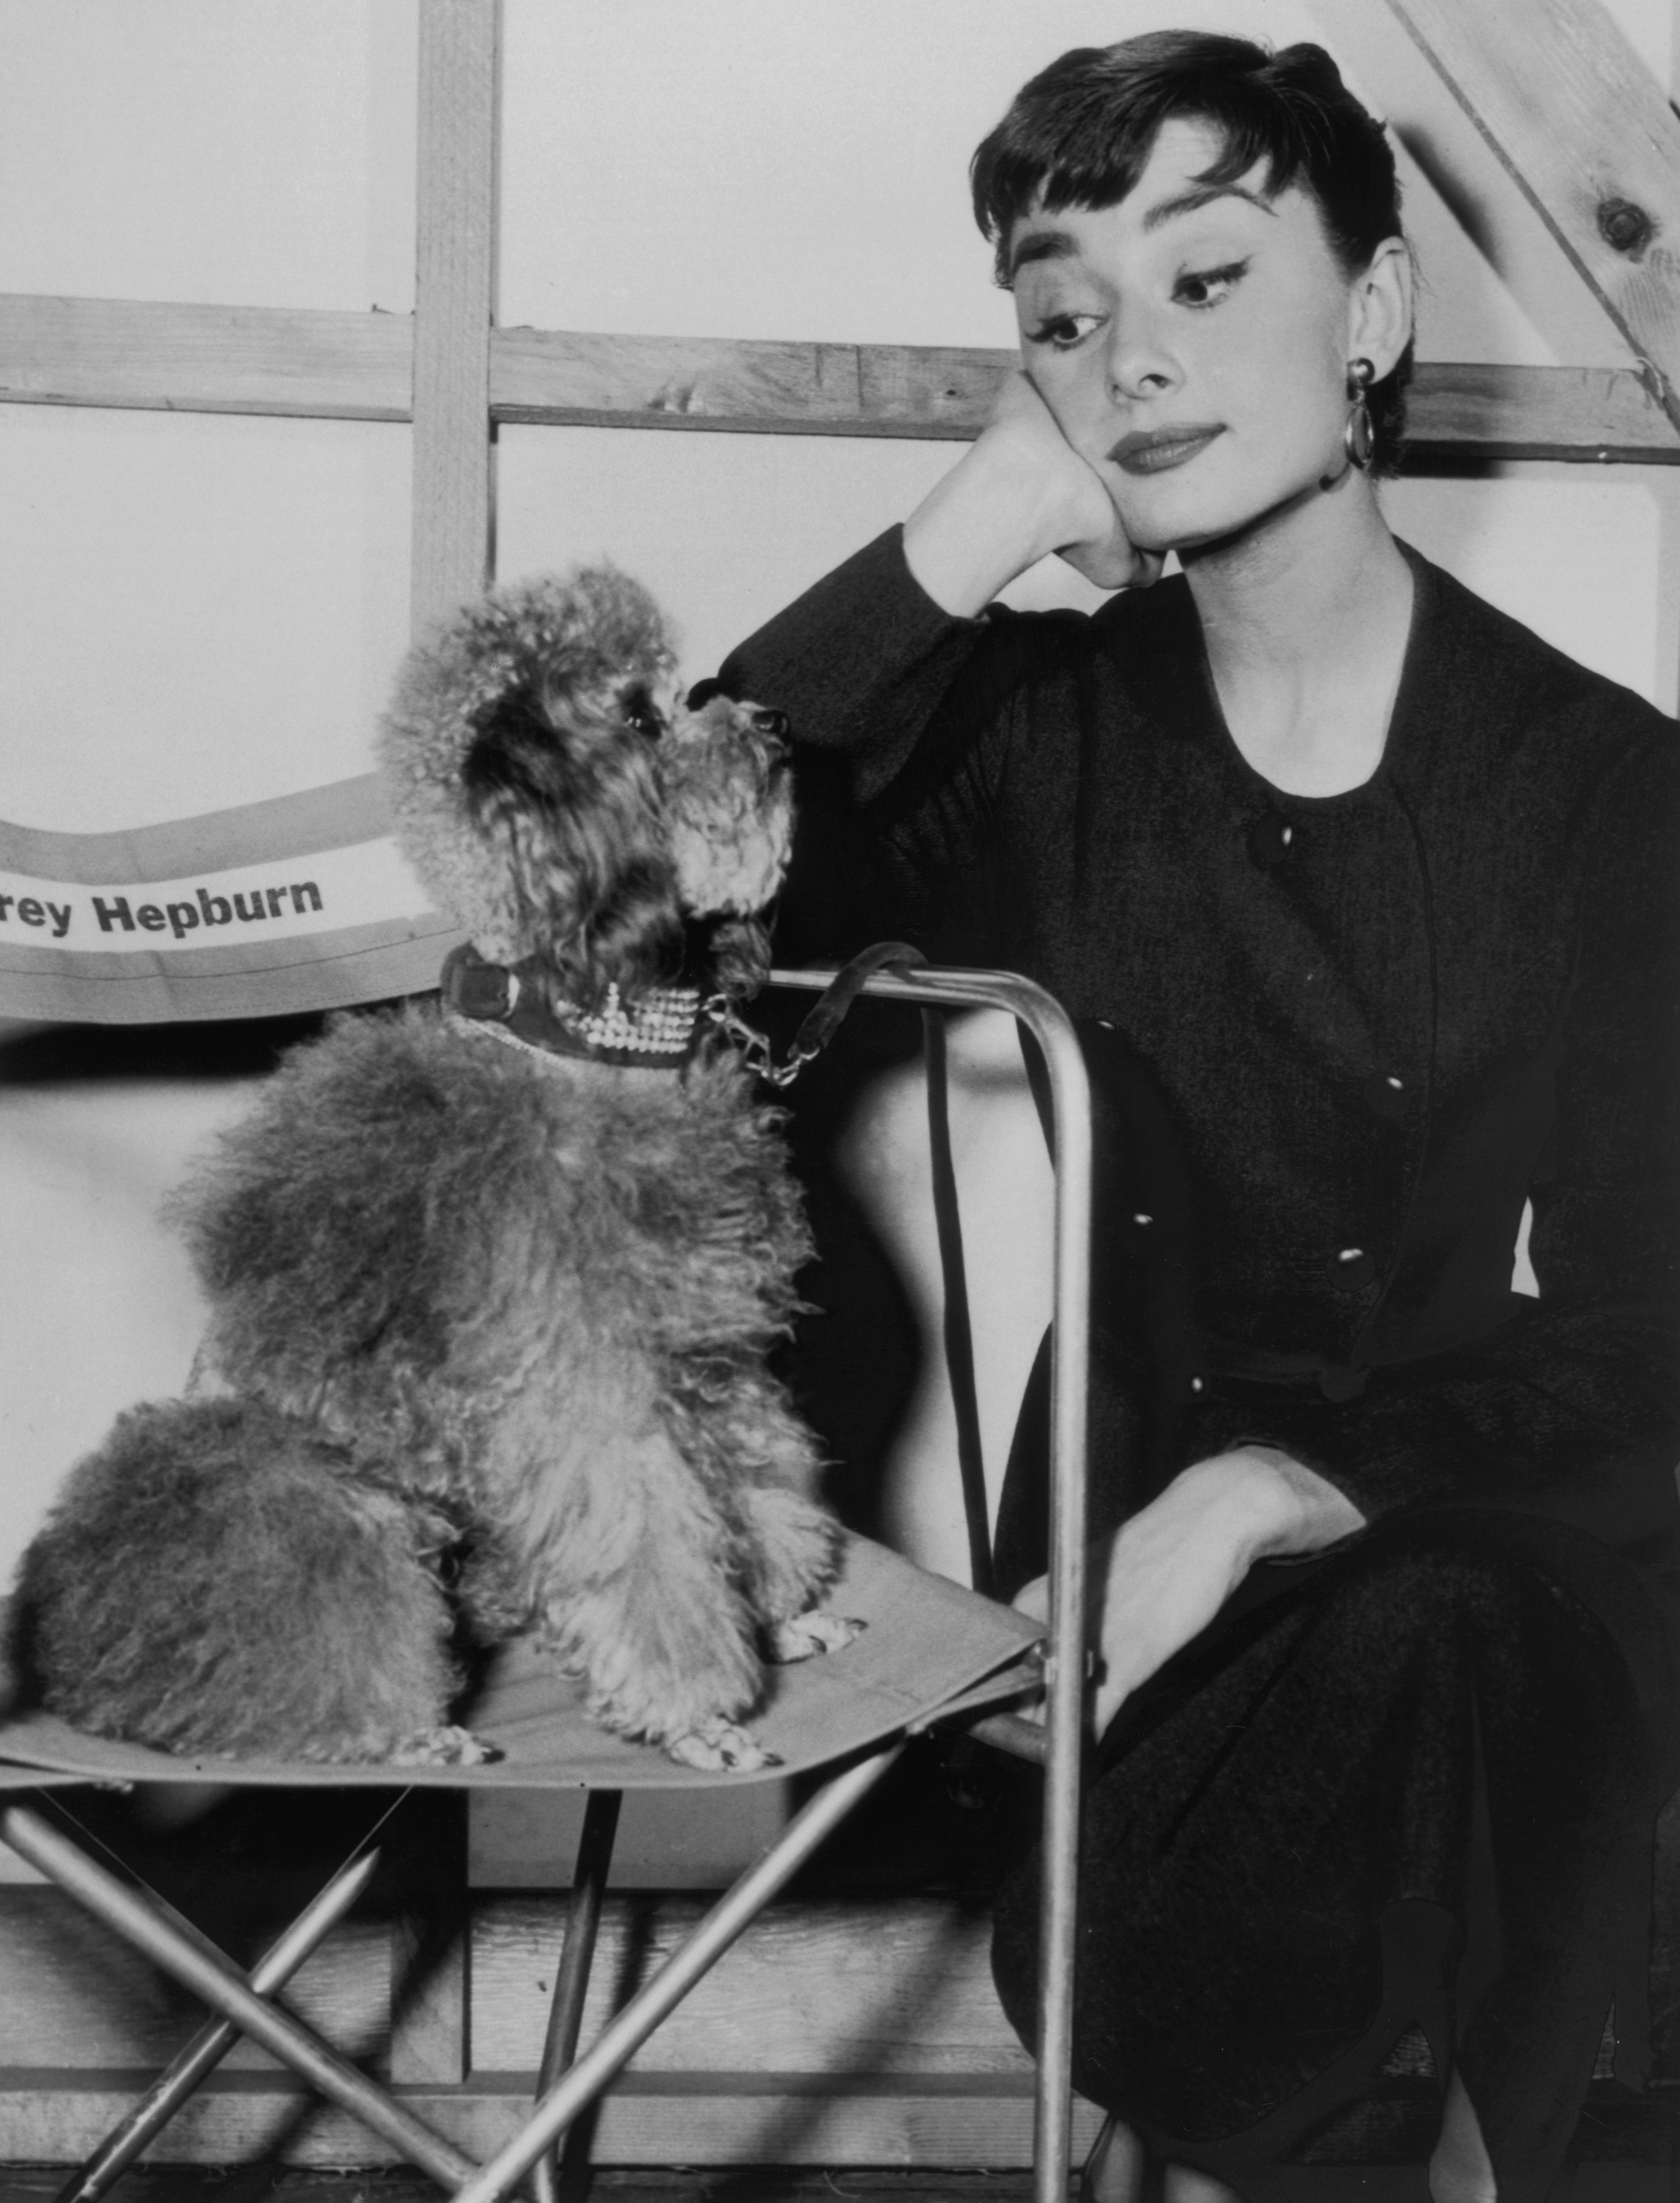 Audrey Hepburn (1929 - 1993) on a film set with her pet poodle, circa 1960. | Source: Getty Images